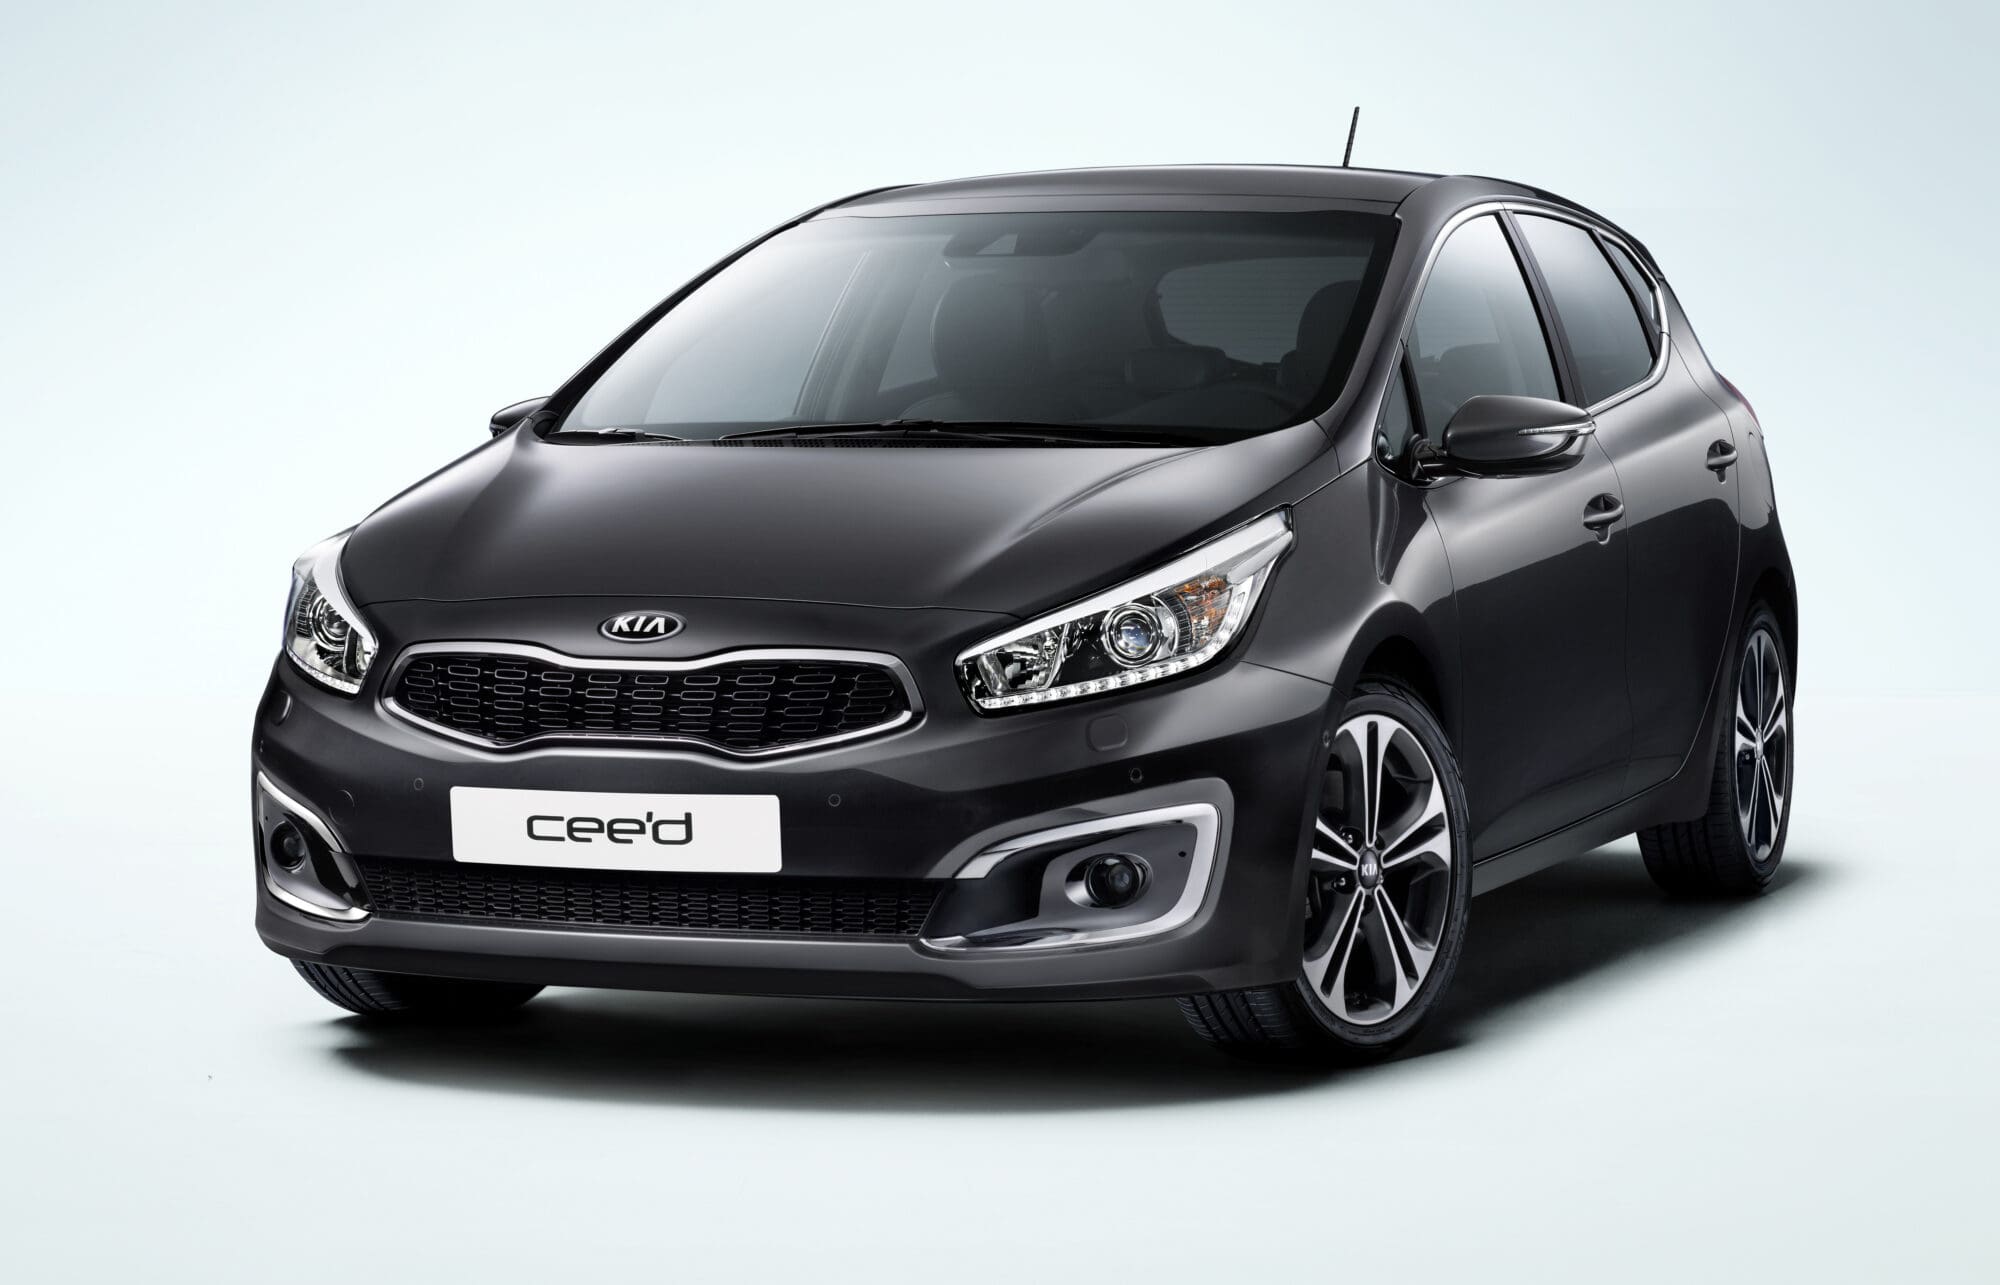 Kia cee'd boasts a fresh new look and a host of smart